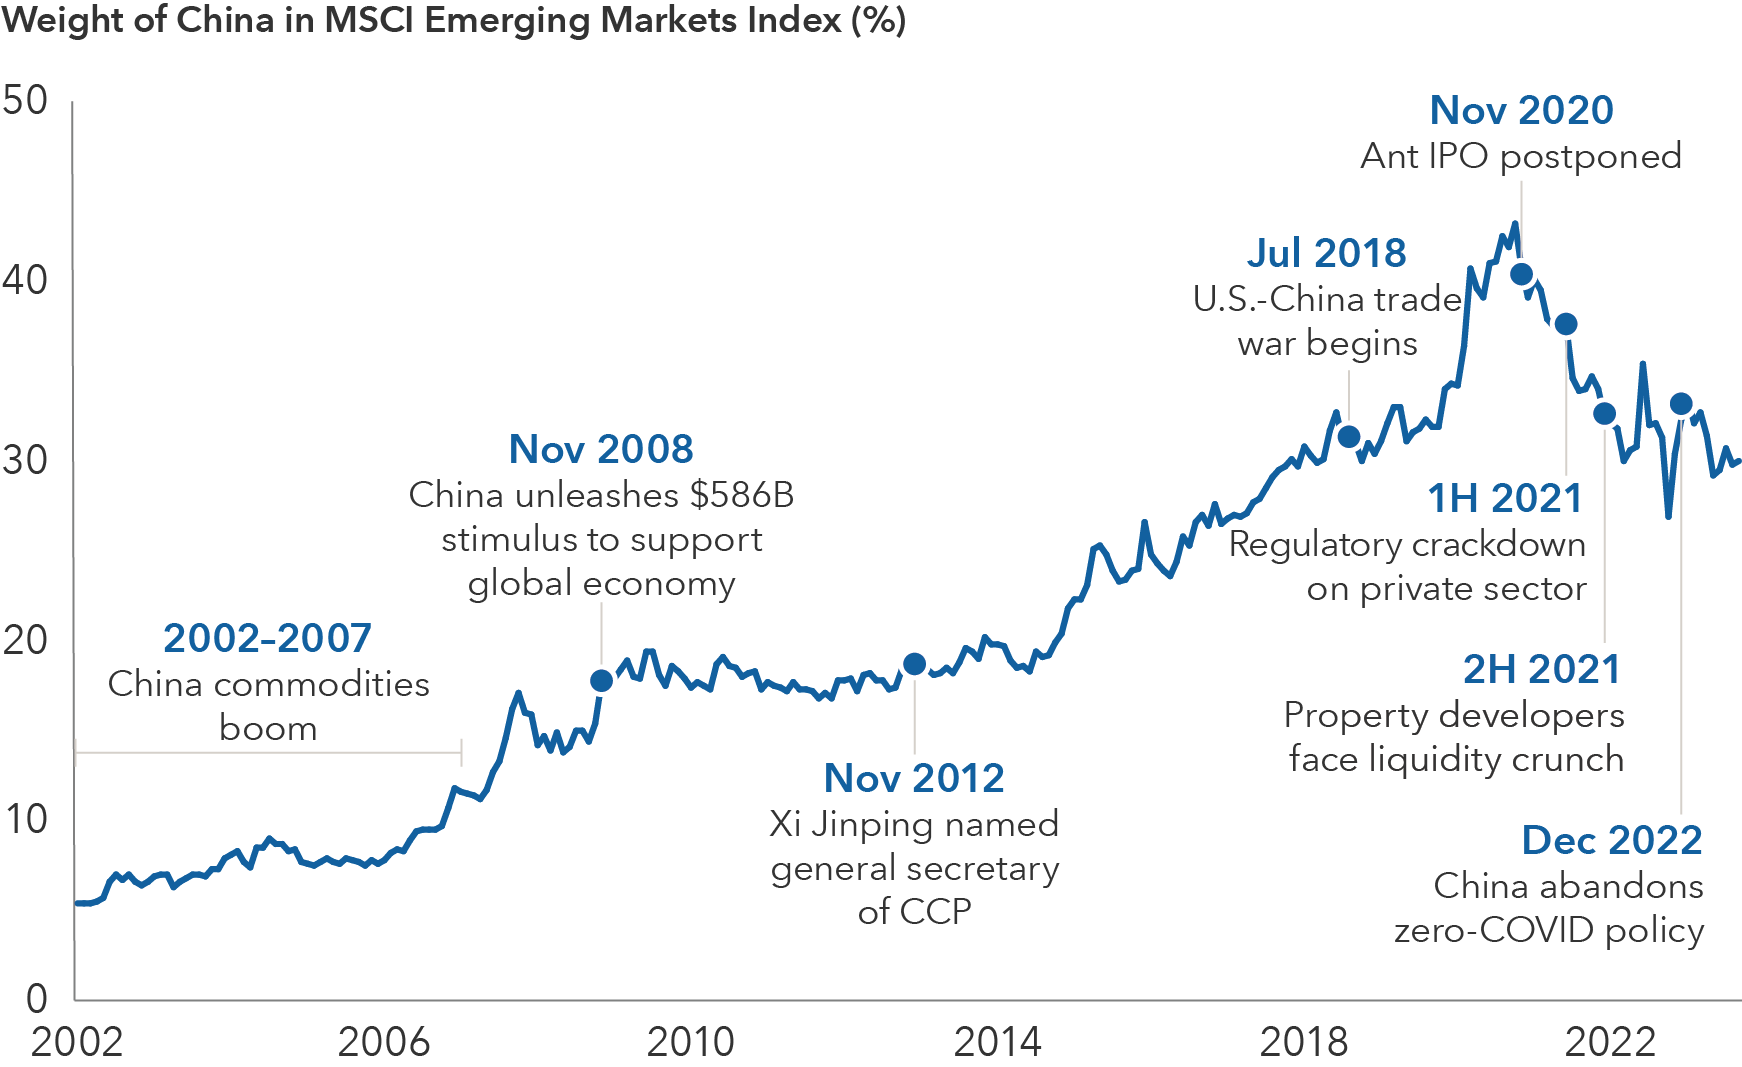 Chart shows percentage weight of China in the MSCI Emerging Markets Index from January 31, 2002, to September 30, 2023. China’s weight in the index began at 5.4%. It steadily rose to eventually peak at 43% in October 2020. The weight then declined to 30%. Labels on the chart indicate: From 2002 to 2007: China commodities boom; in that period, China’s weight in the MSCI Emerging Markets Index ranged from 5.4% to 11.5%. November 2008: China unleashes $586 billion stimulus to support global economy; in that month, China’s weight in the MSCI Emerging Markets Index was 17.7%. November 2012: Xi Jinping named general secretary of the Chinese Communist Party; in that month, China’s weight in the MSCI Emerging Markets Index was 18.6%. July 2018: U.S.-China trade war begins; in that month, China’s weight in the MSCI Emerging Markets Index was 31.2%. November 2020: Ant IPO postponed; in that month, China’s weight in the MSCI Emerging Markets Index was 40.7%. First half of 2021: Regulatory crackdown on private sector; in that period, China’s weight in the MSCI Emerging Markets Index declined from 39.1% to 37.5%. Second half of 2021: Property developers face liquidity crunch; in that period, China’s weight in the MSCI Emerging Markets Index declined from 37.5% to 32.4%. December 2022: China abandons zero-COVID policy; in that month, China’s weight in the MSCI Emerging Markets Index was 32.3%.